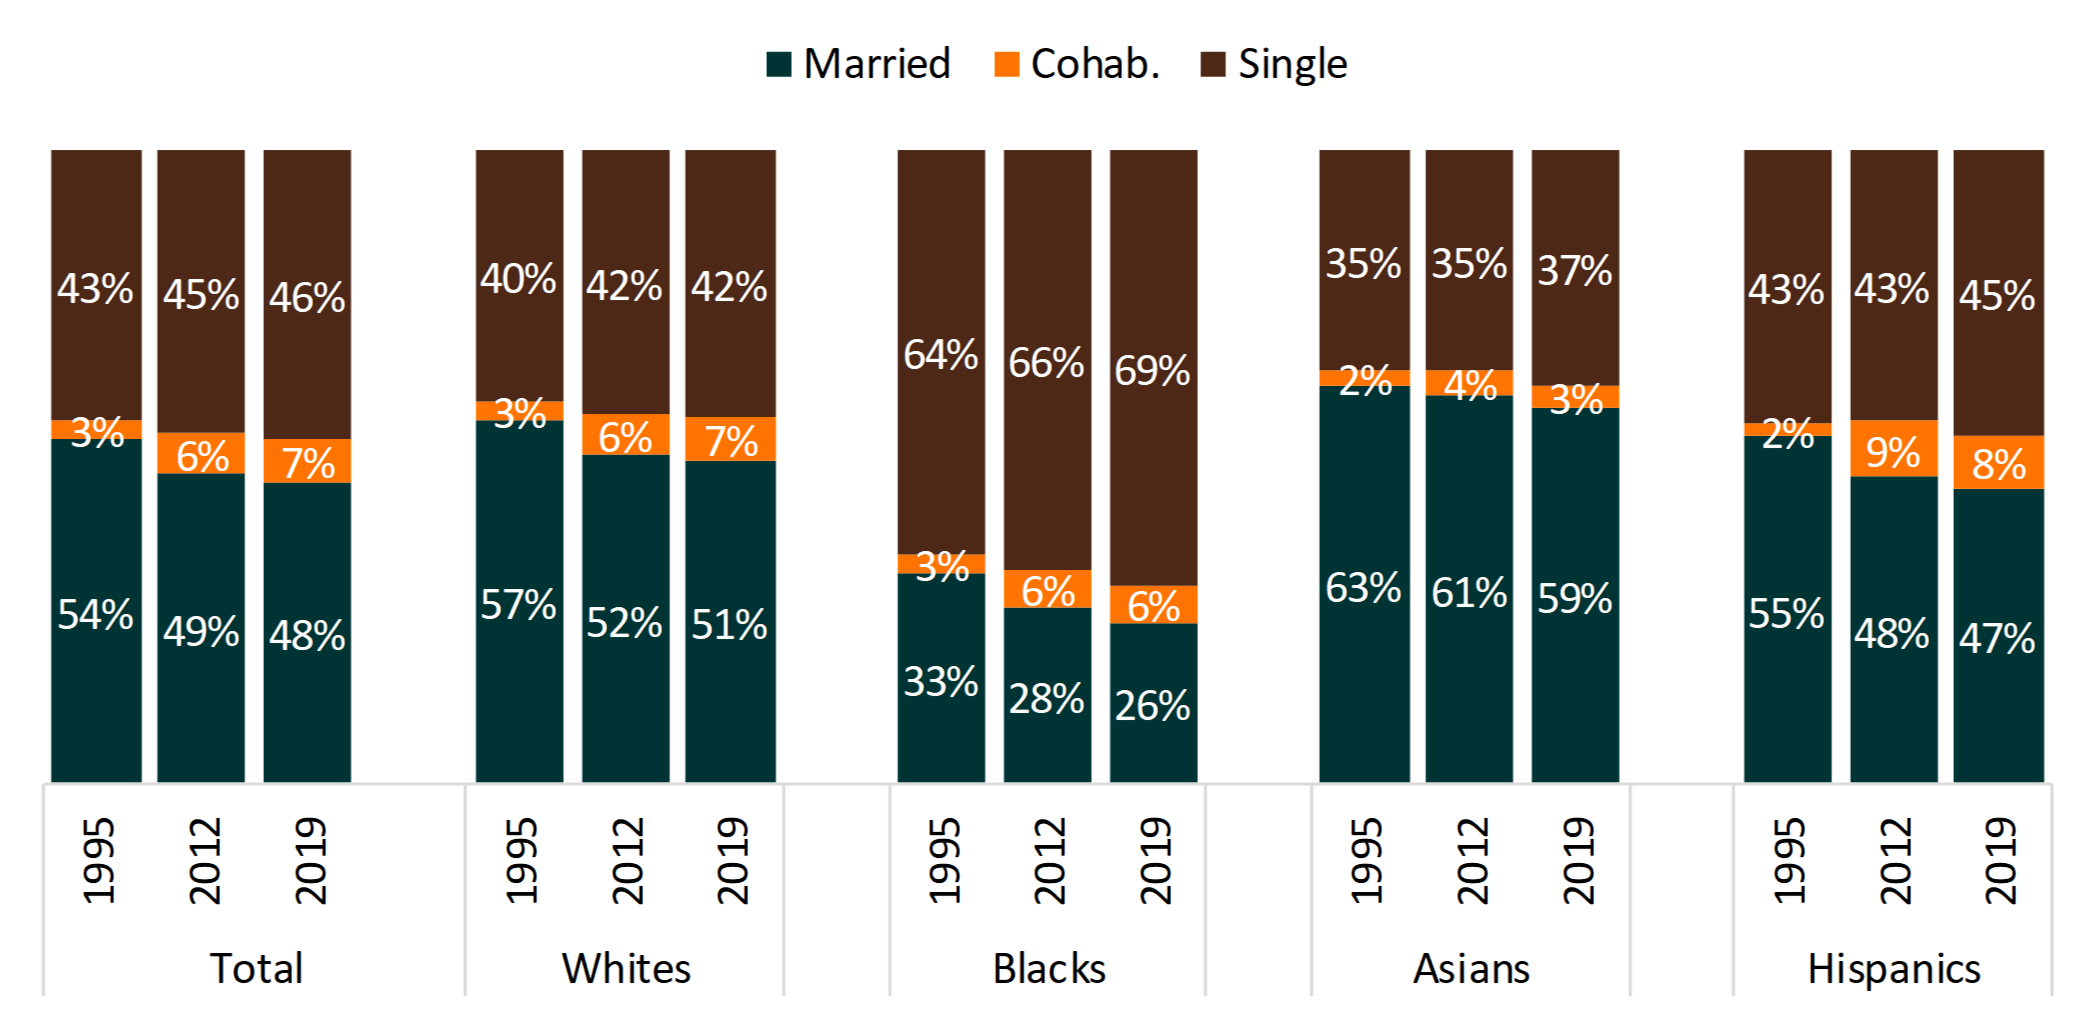 bar chart showing Figure 1. Changes in the Shares of Single, Cohabiting, and Married Households, by Age